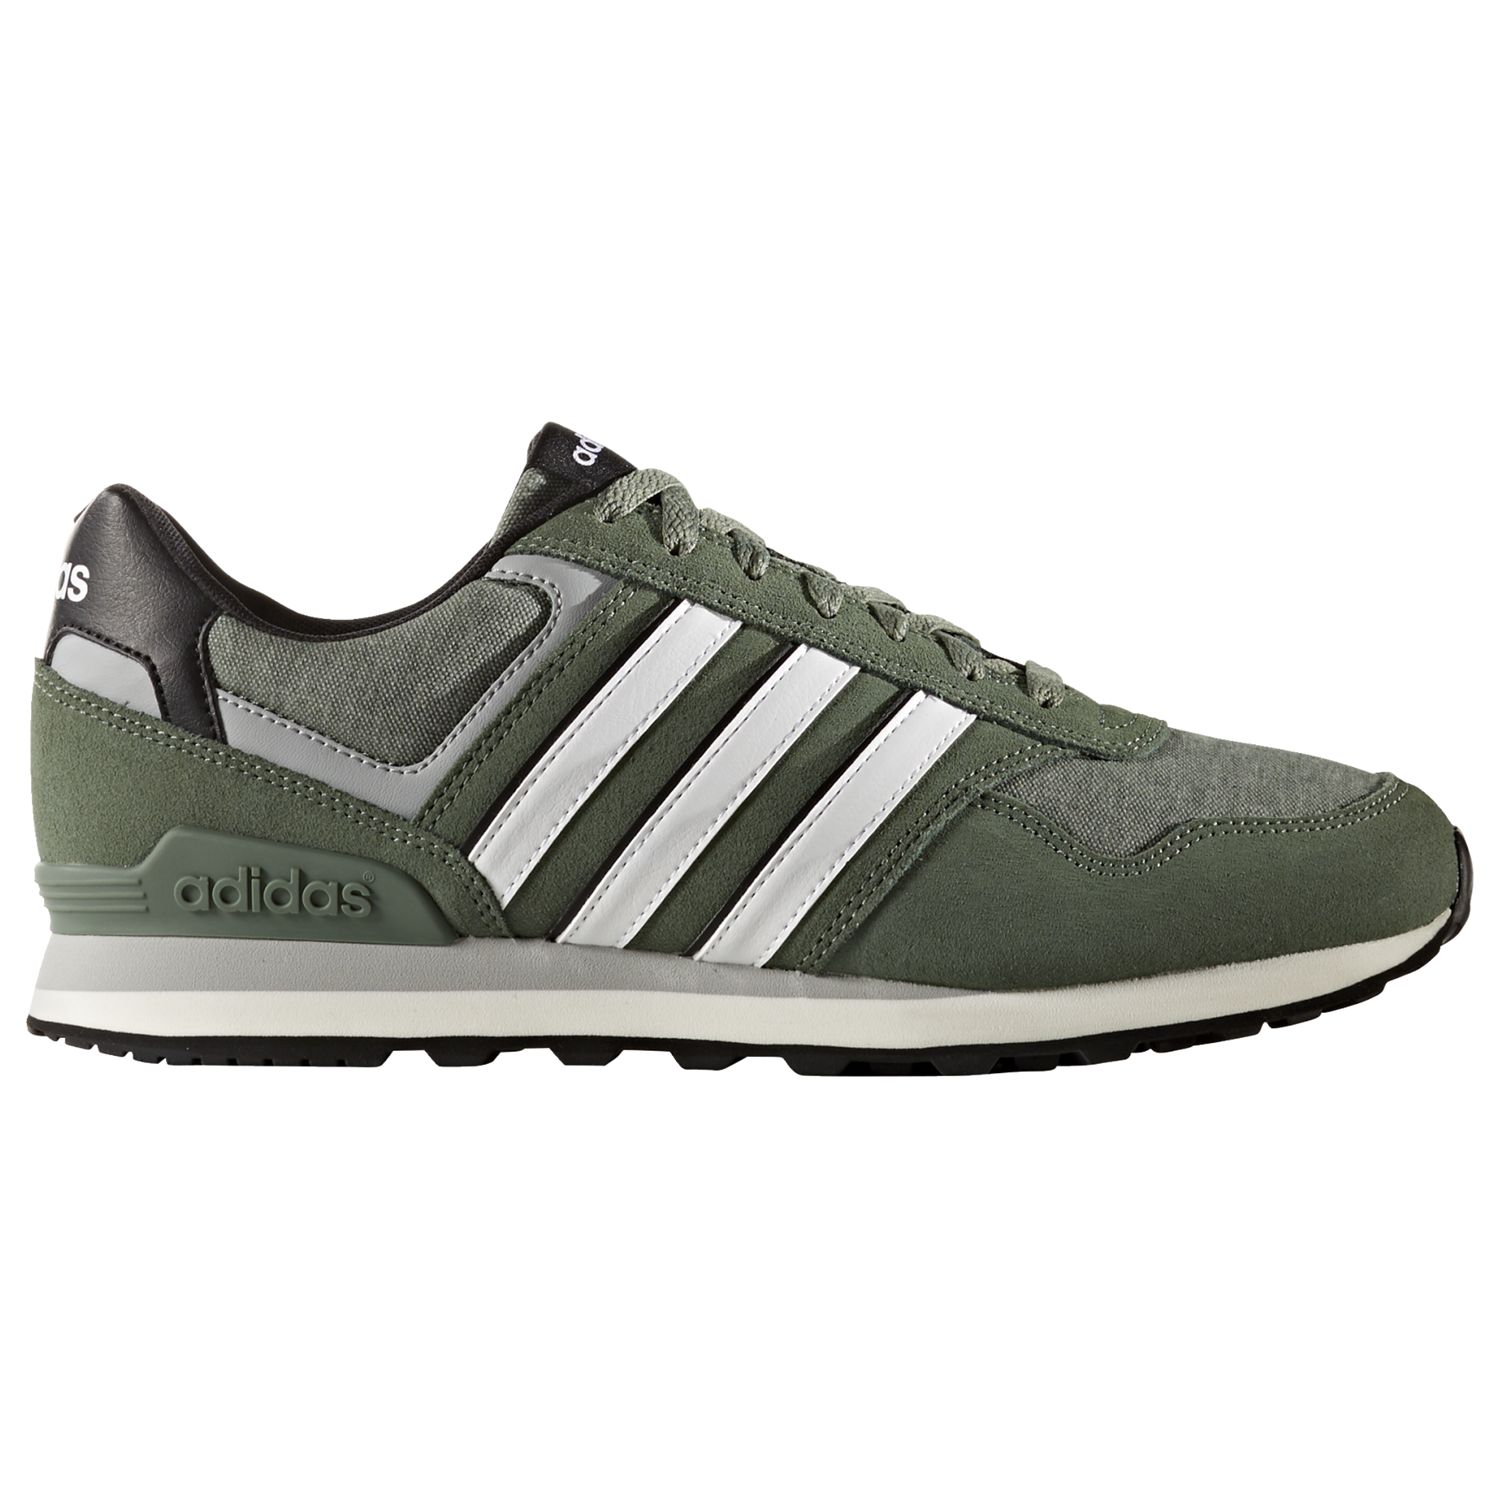 Adidas Neo 10K Casual Men's Trainers at 